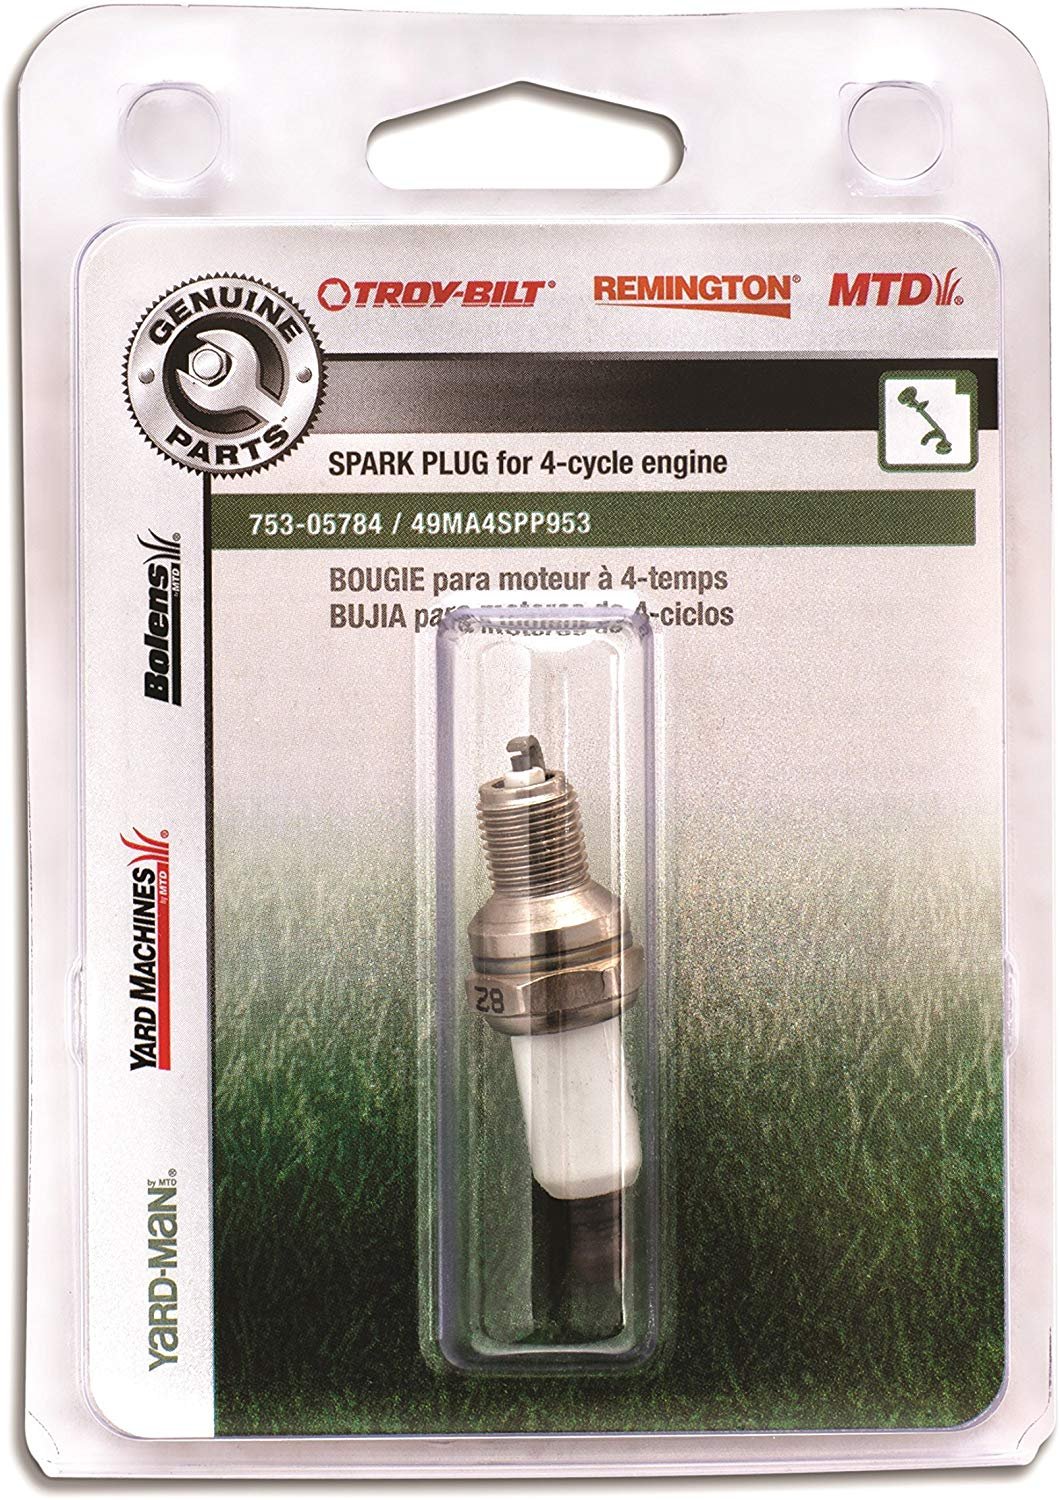 MTD Genuine Parts Replacement Trimmer 4-cycle Spark Plug